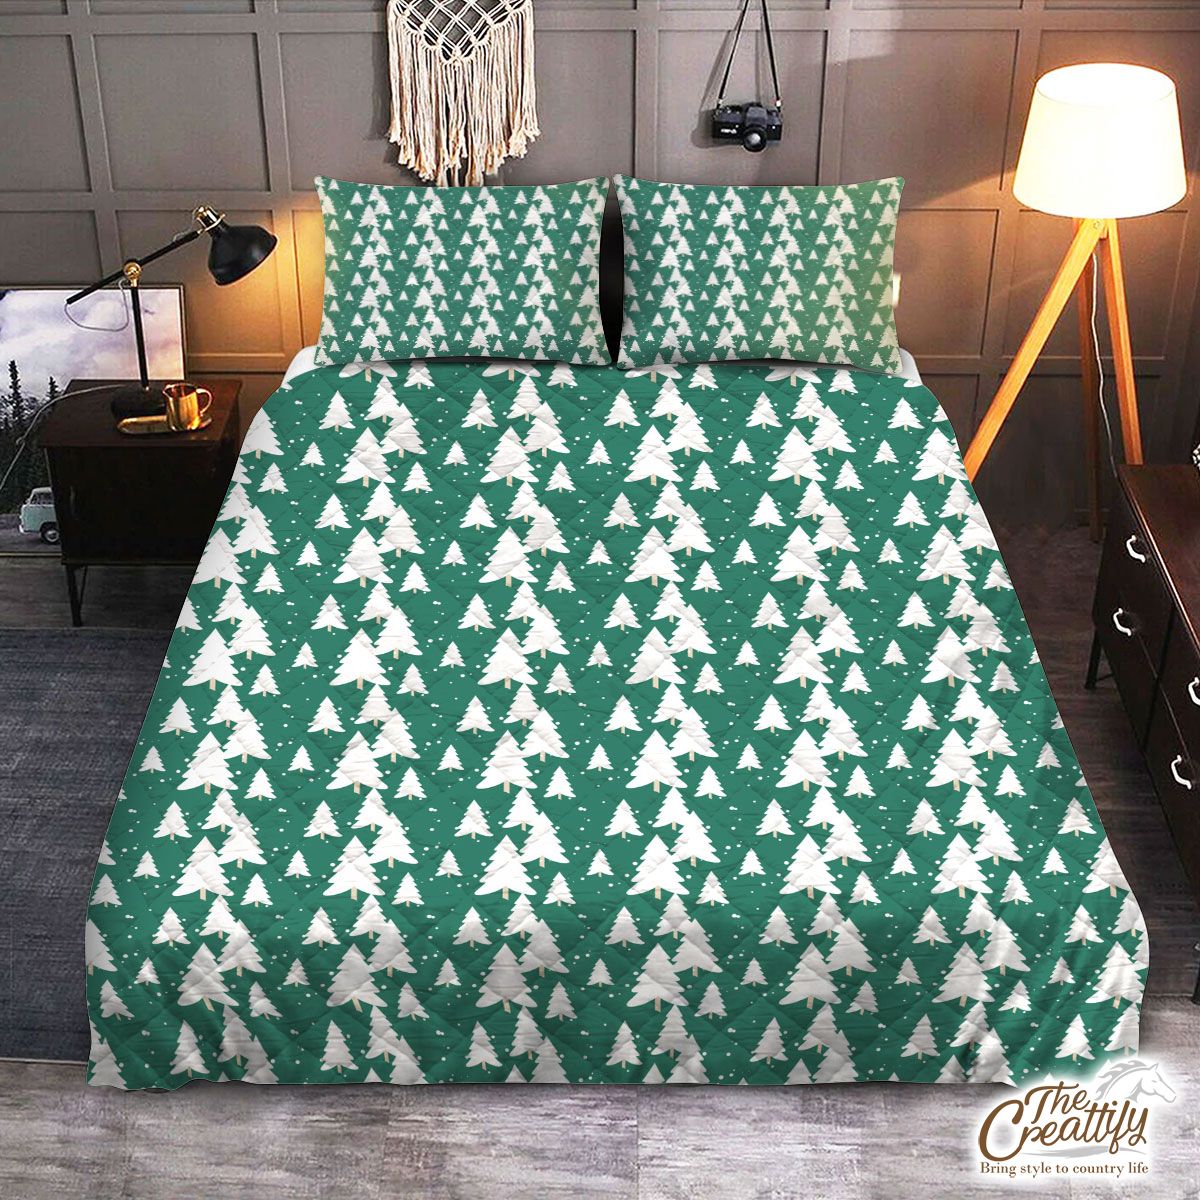 Green And White Christmas Tree Quilt Set